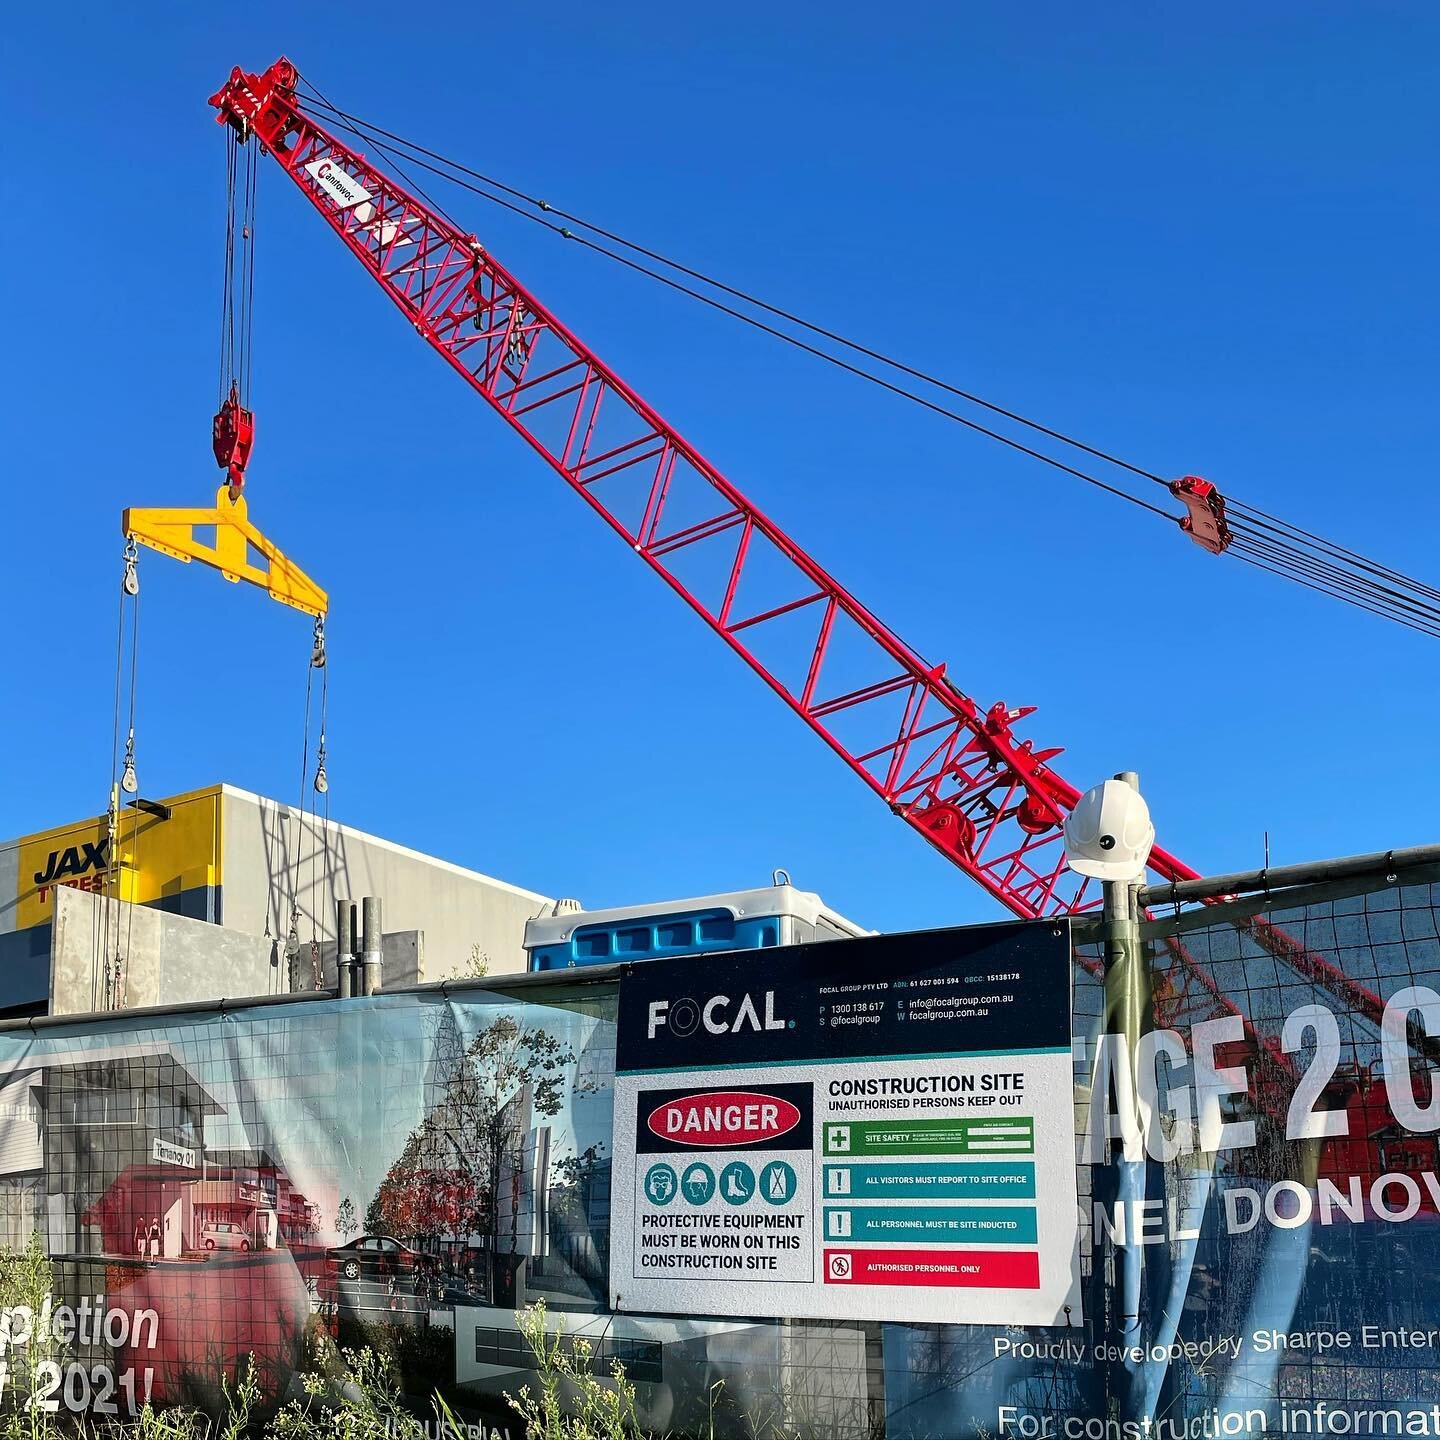 We just love seeing cranes in the sky 🏗 #construction #development #commercialconstruction #industialdesign